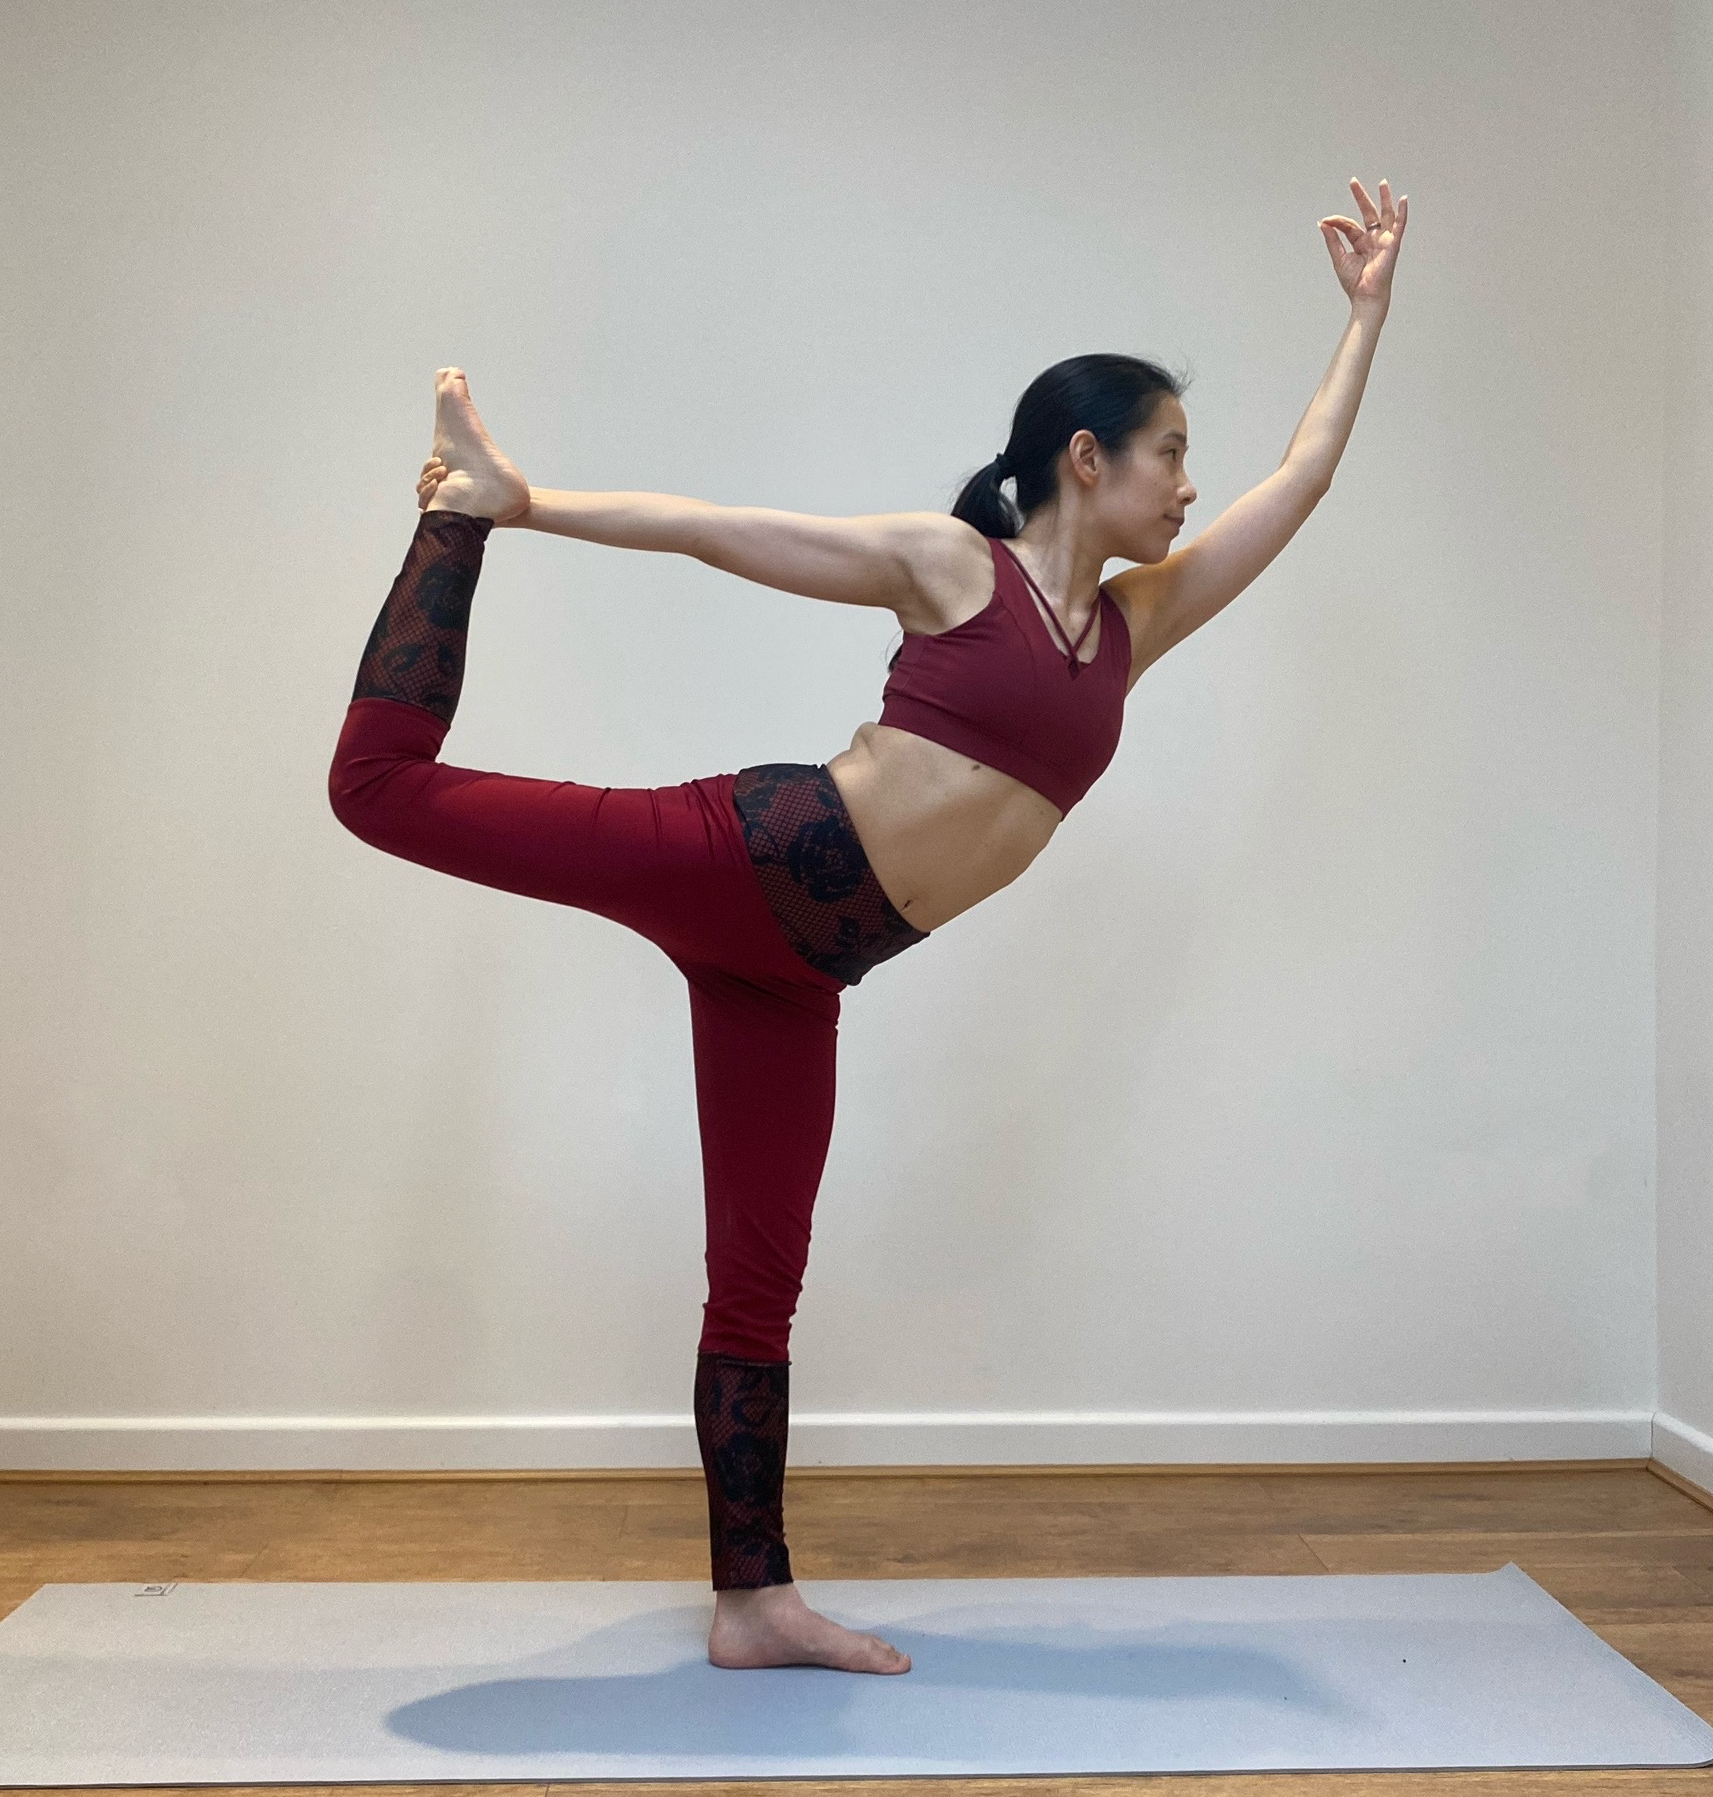 Yoga Mind Balance offers yoga classes, 1-1 Private Yoga sessions and Workshops in South Woodford.